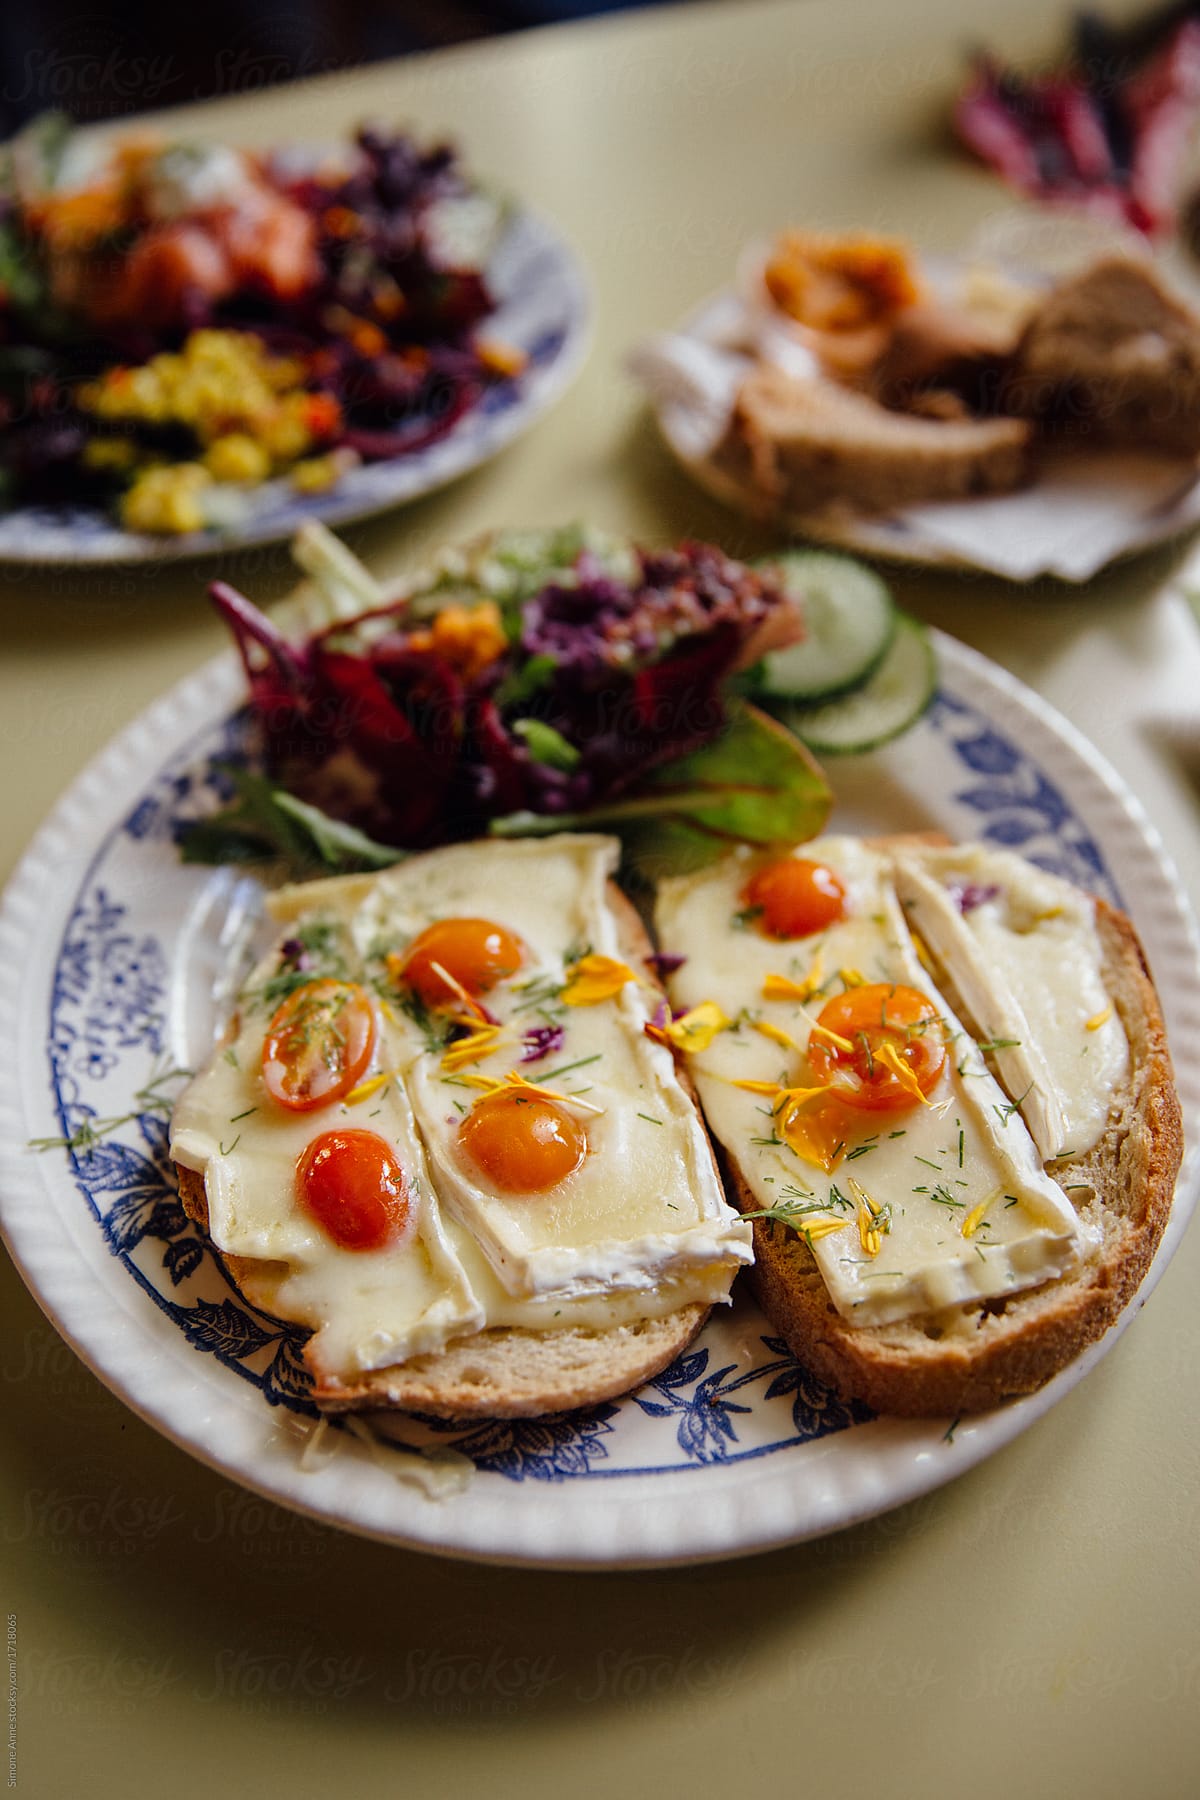 Cheese and tomatoes on toast with salad